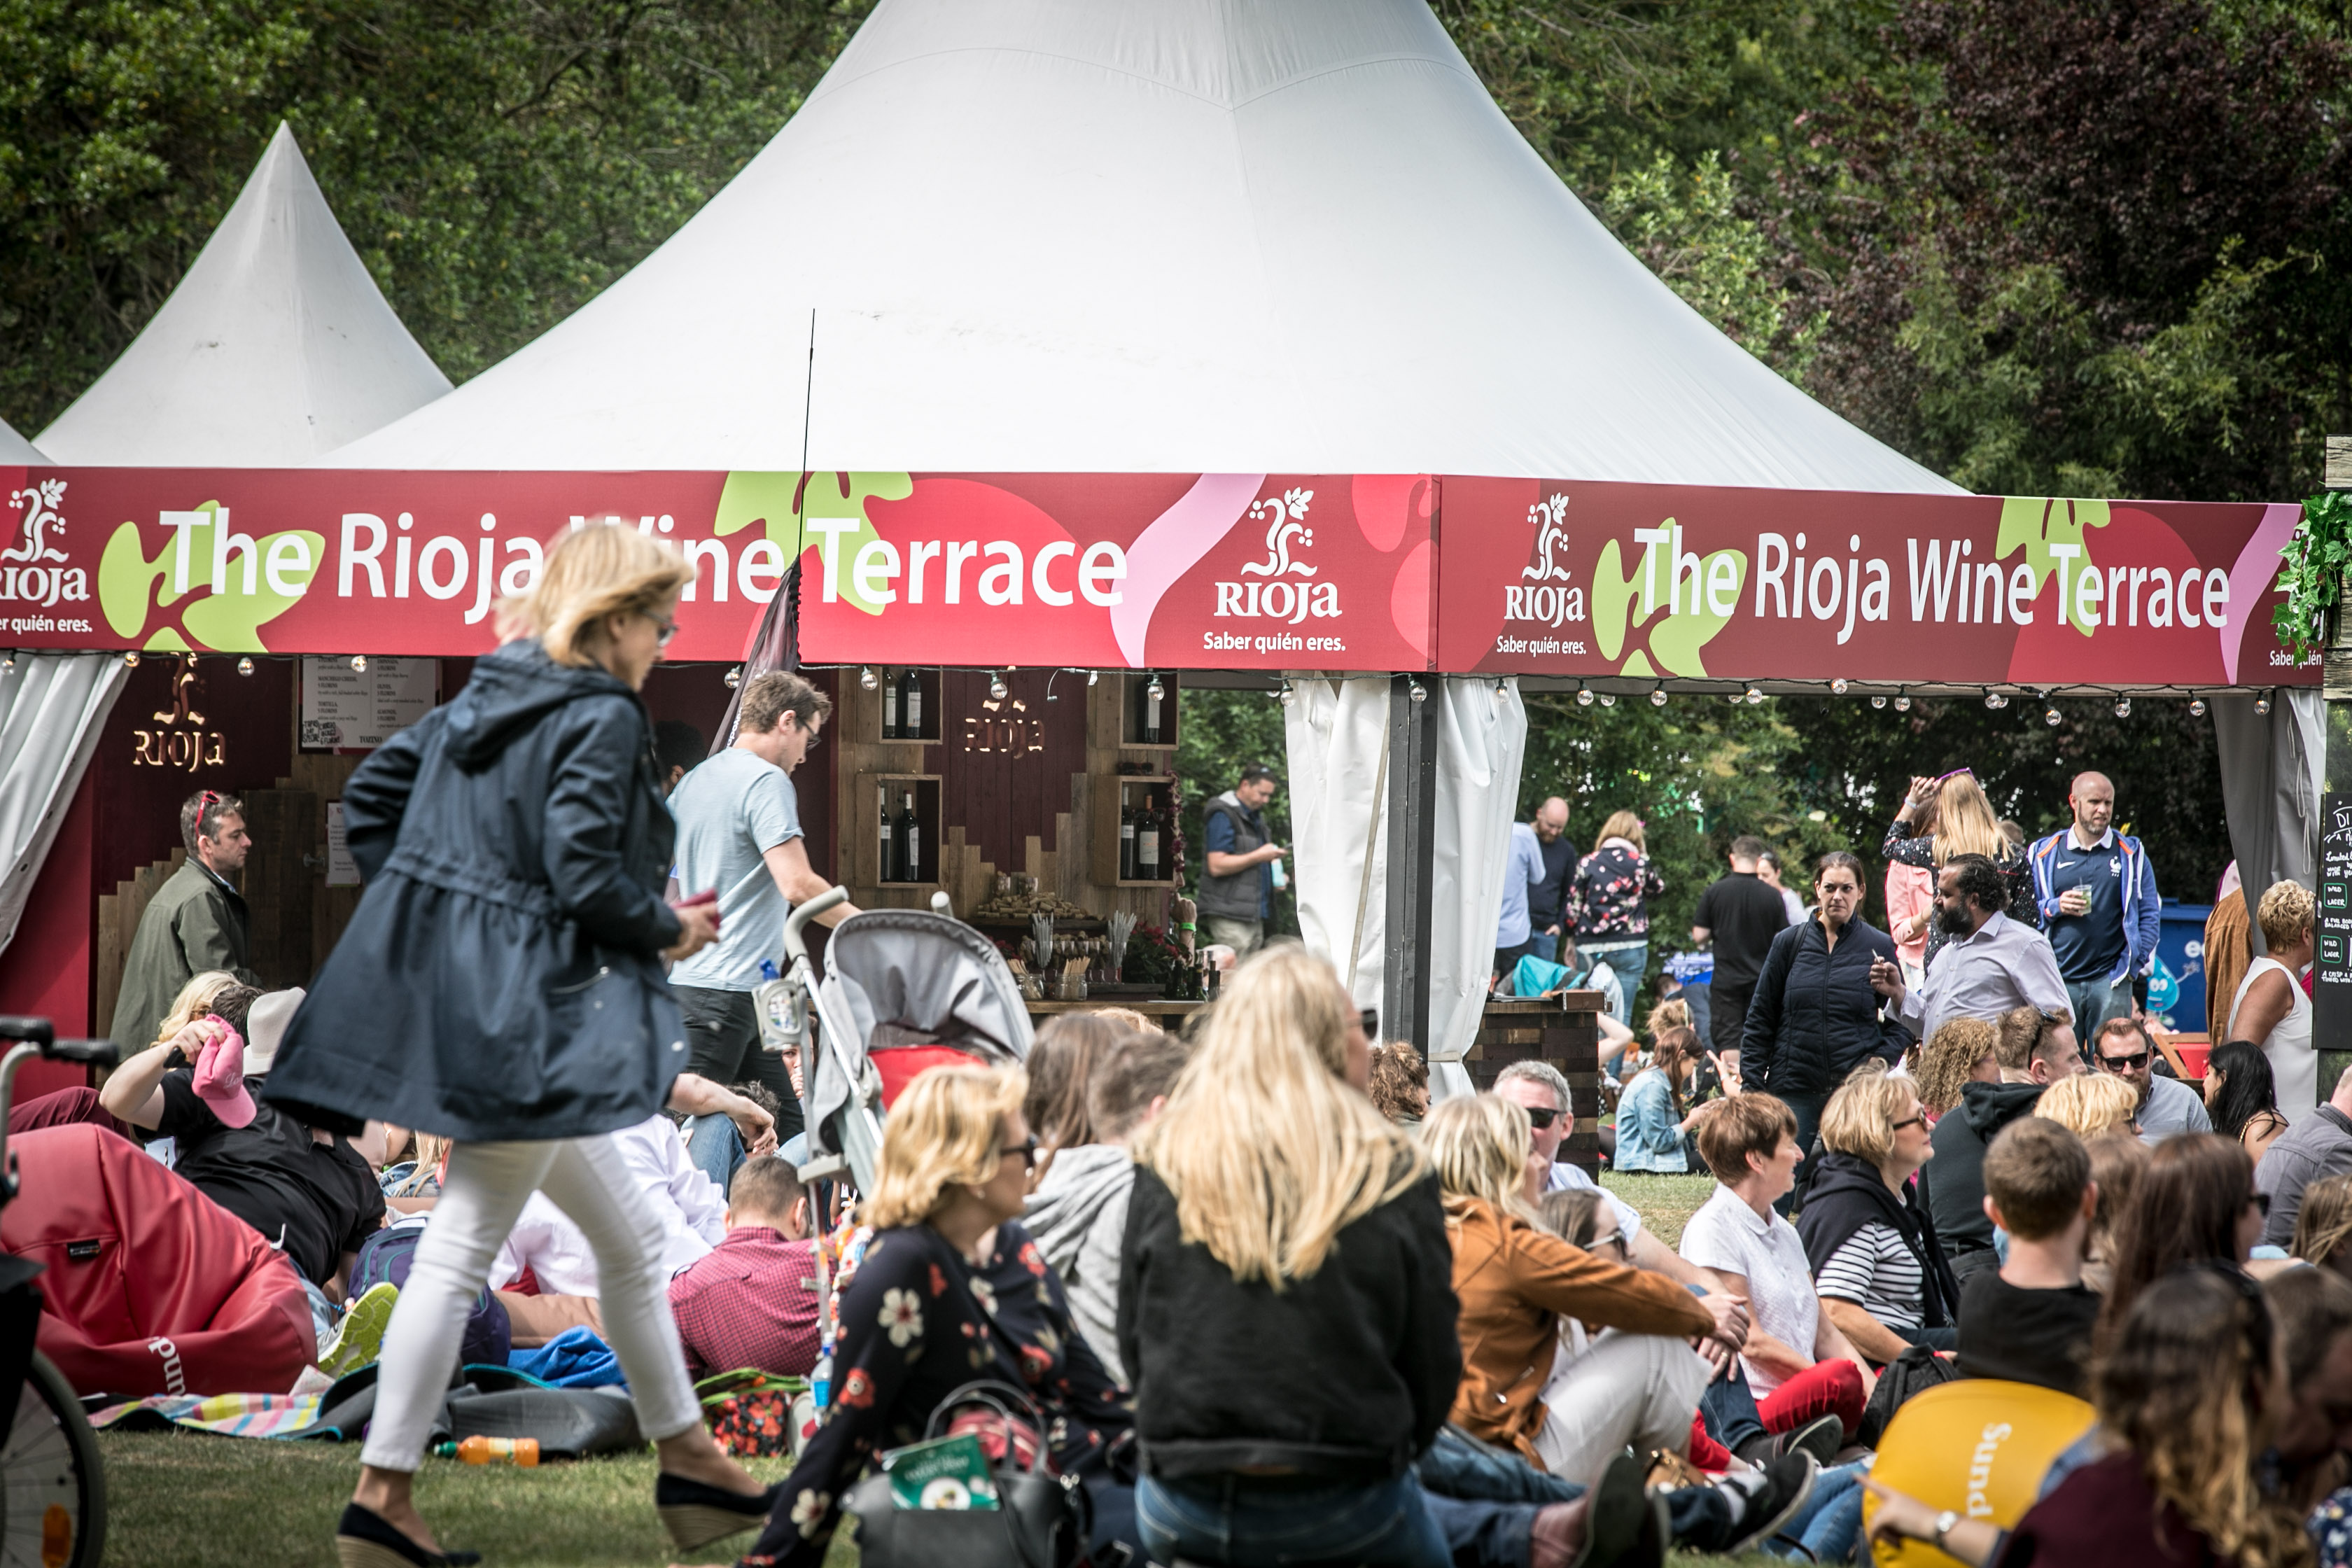 Rioja wines arouse the interest of more than 33,000 young people attending ‘Taste of Dublin’